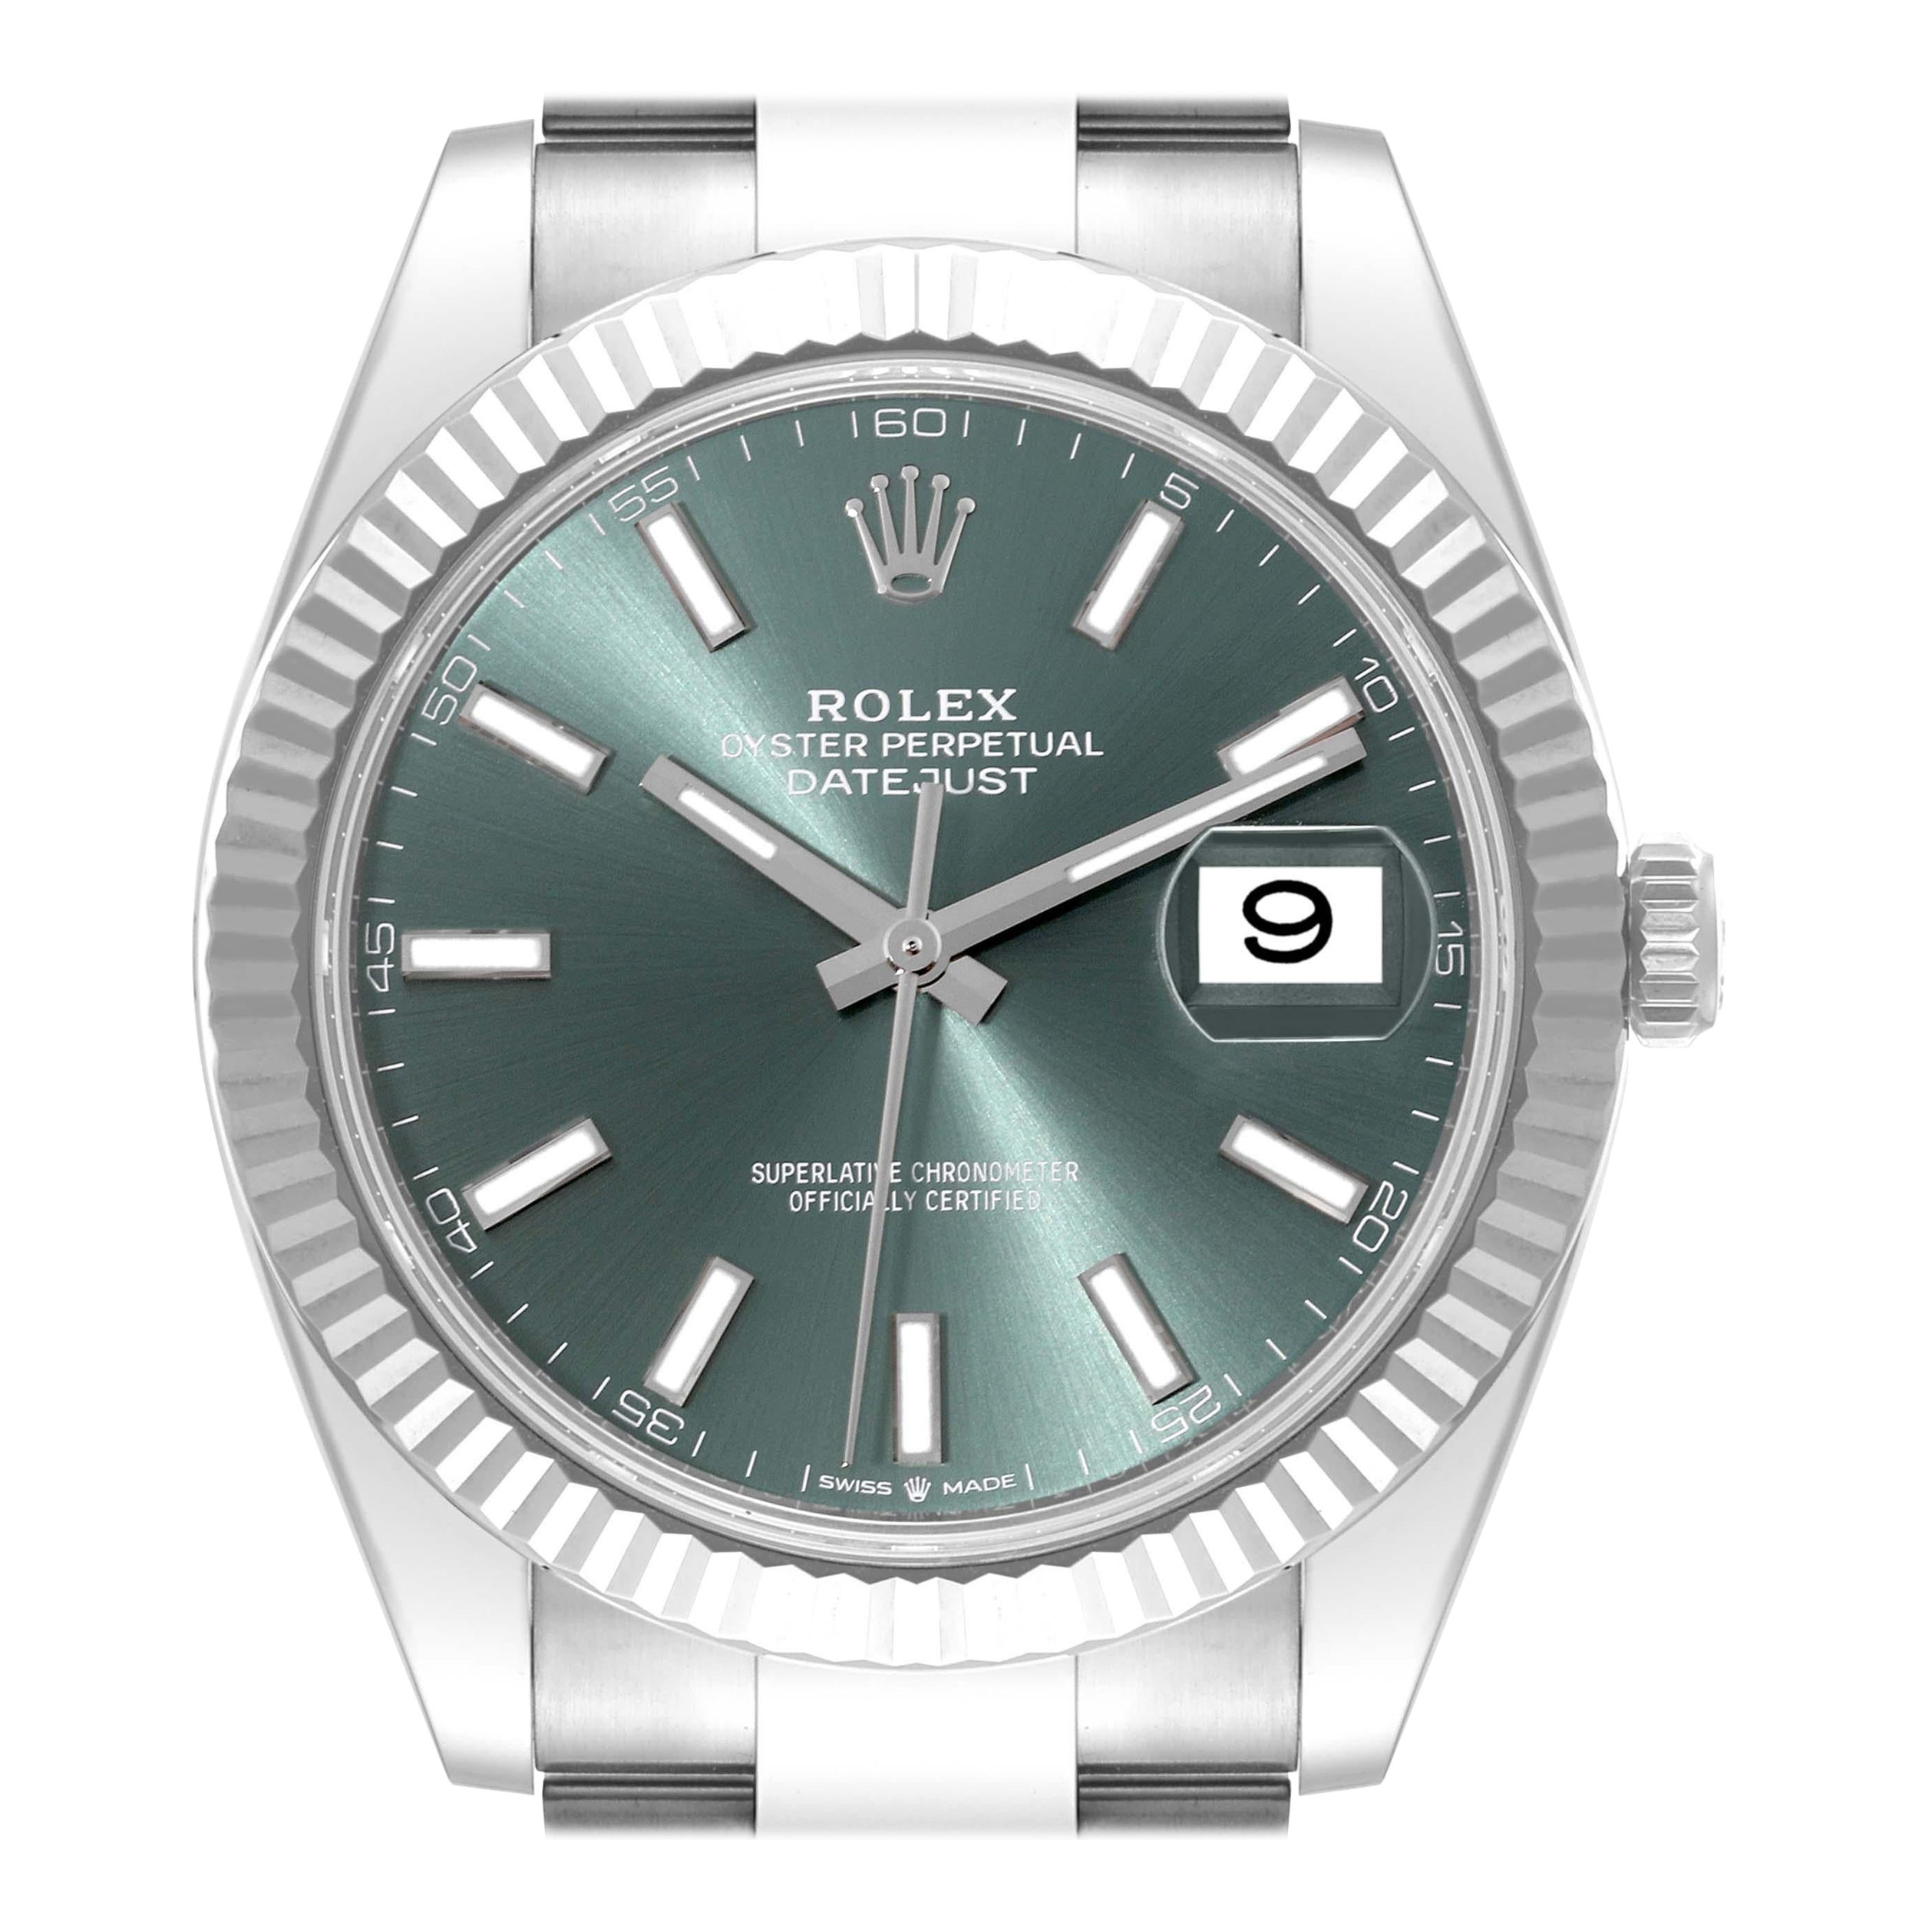 Rolex Datejust 41 Steel White Gold Mint Green Dial Mens Watch 126334 Box Card